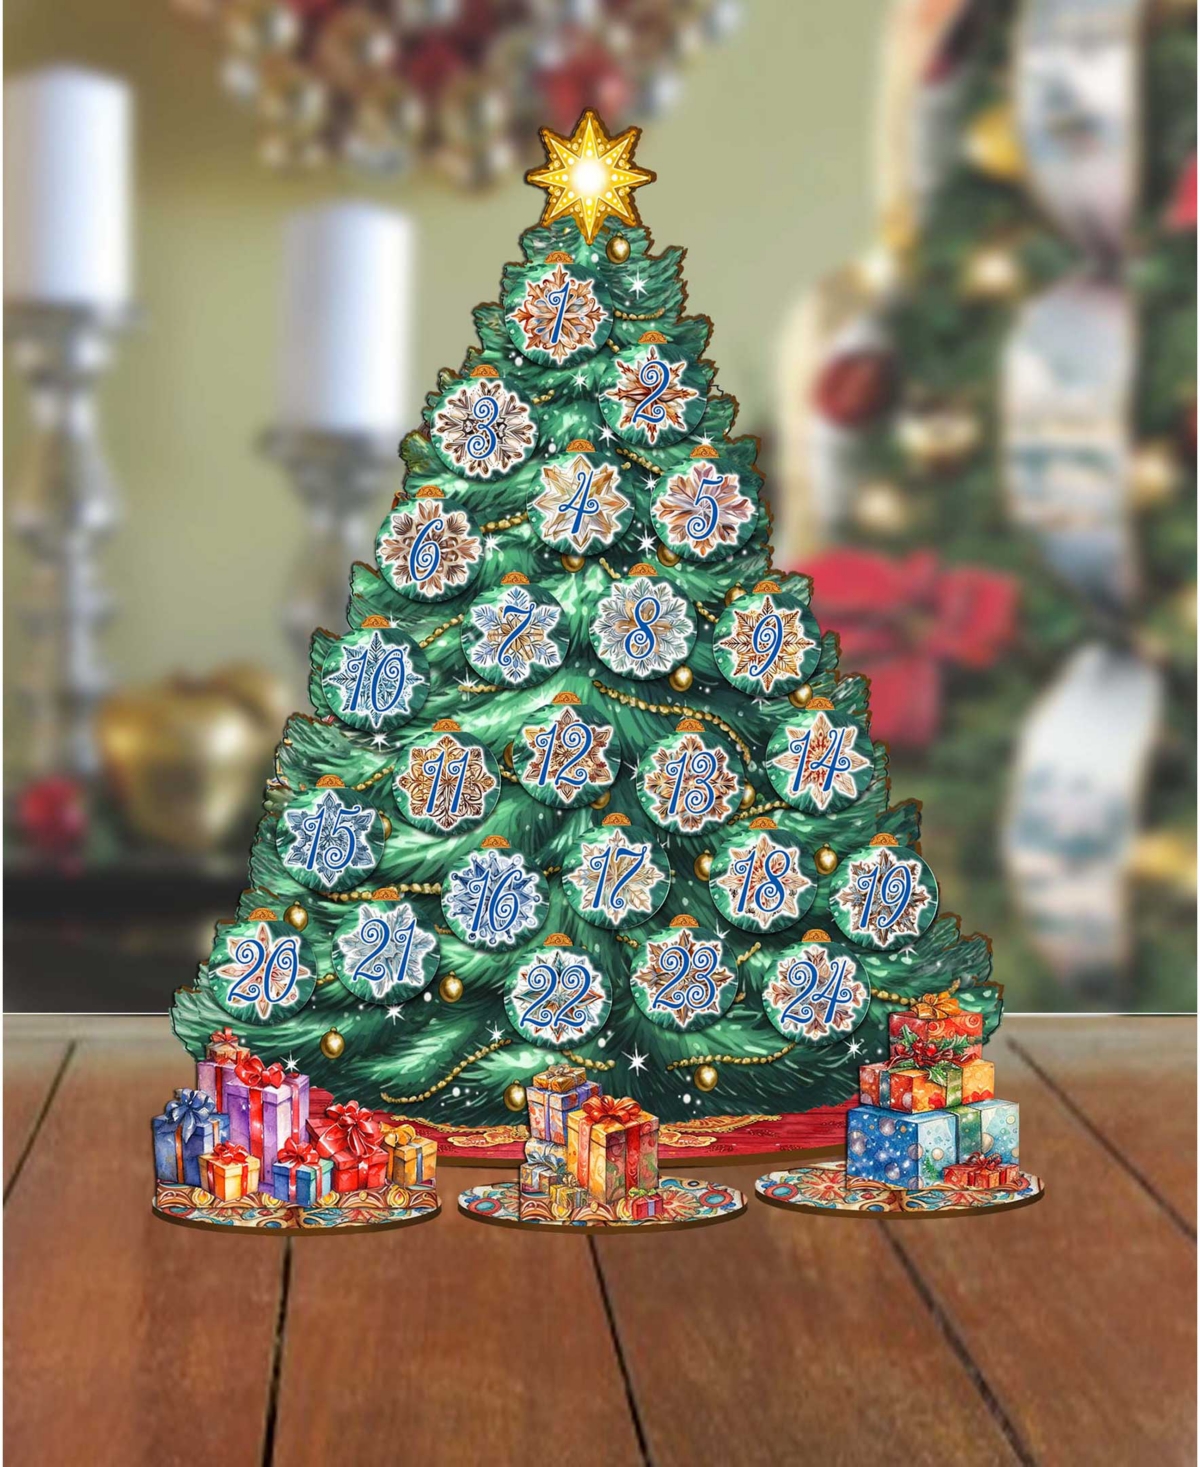 Shop Designocracy Advent Calendar Themed Wooden Christmas Tree With Ornaments Set Of 28 G. Debrekht In Multi Color